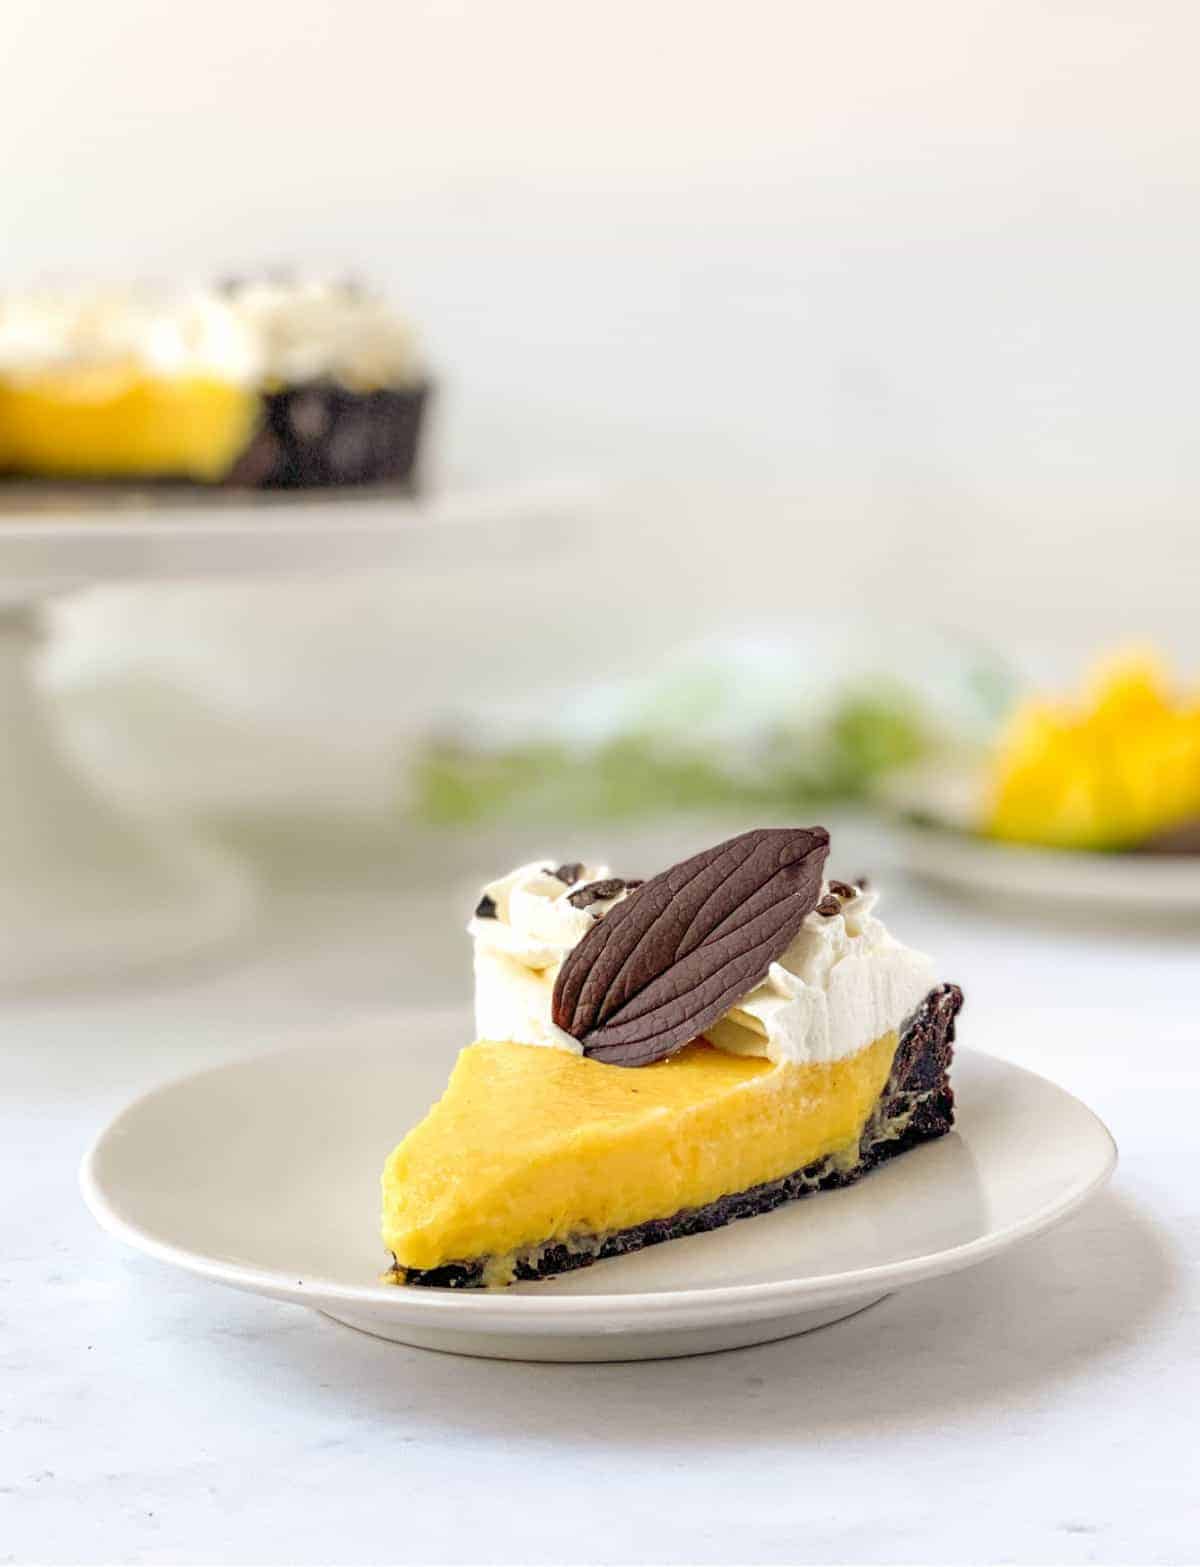 Slice of Chocolate Mango Tart on a white plate with a chocolate leaf on top, with the rest of the tart and mangos in the background